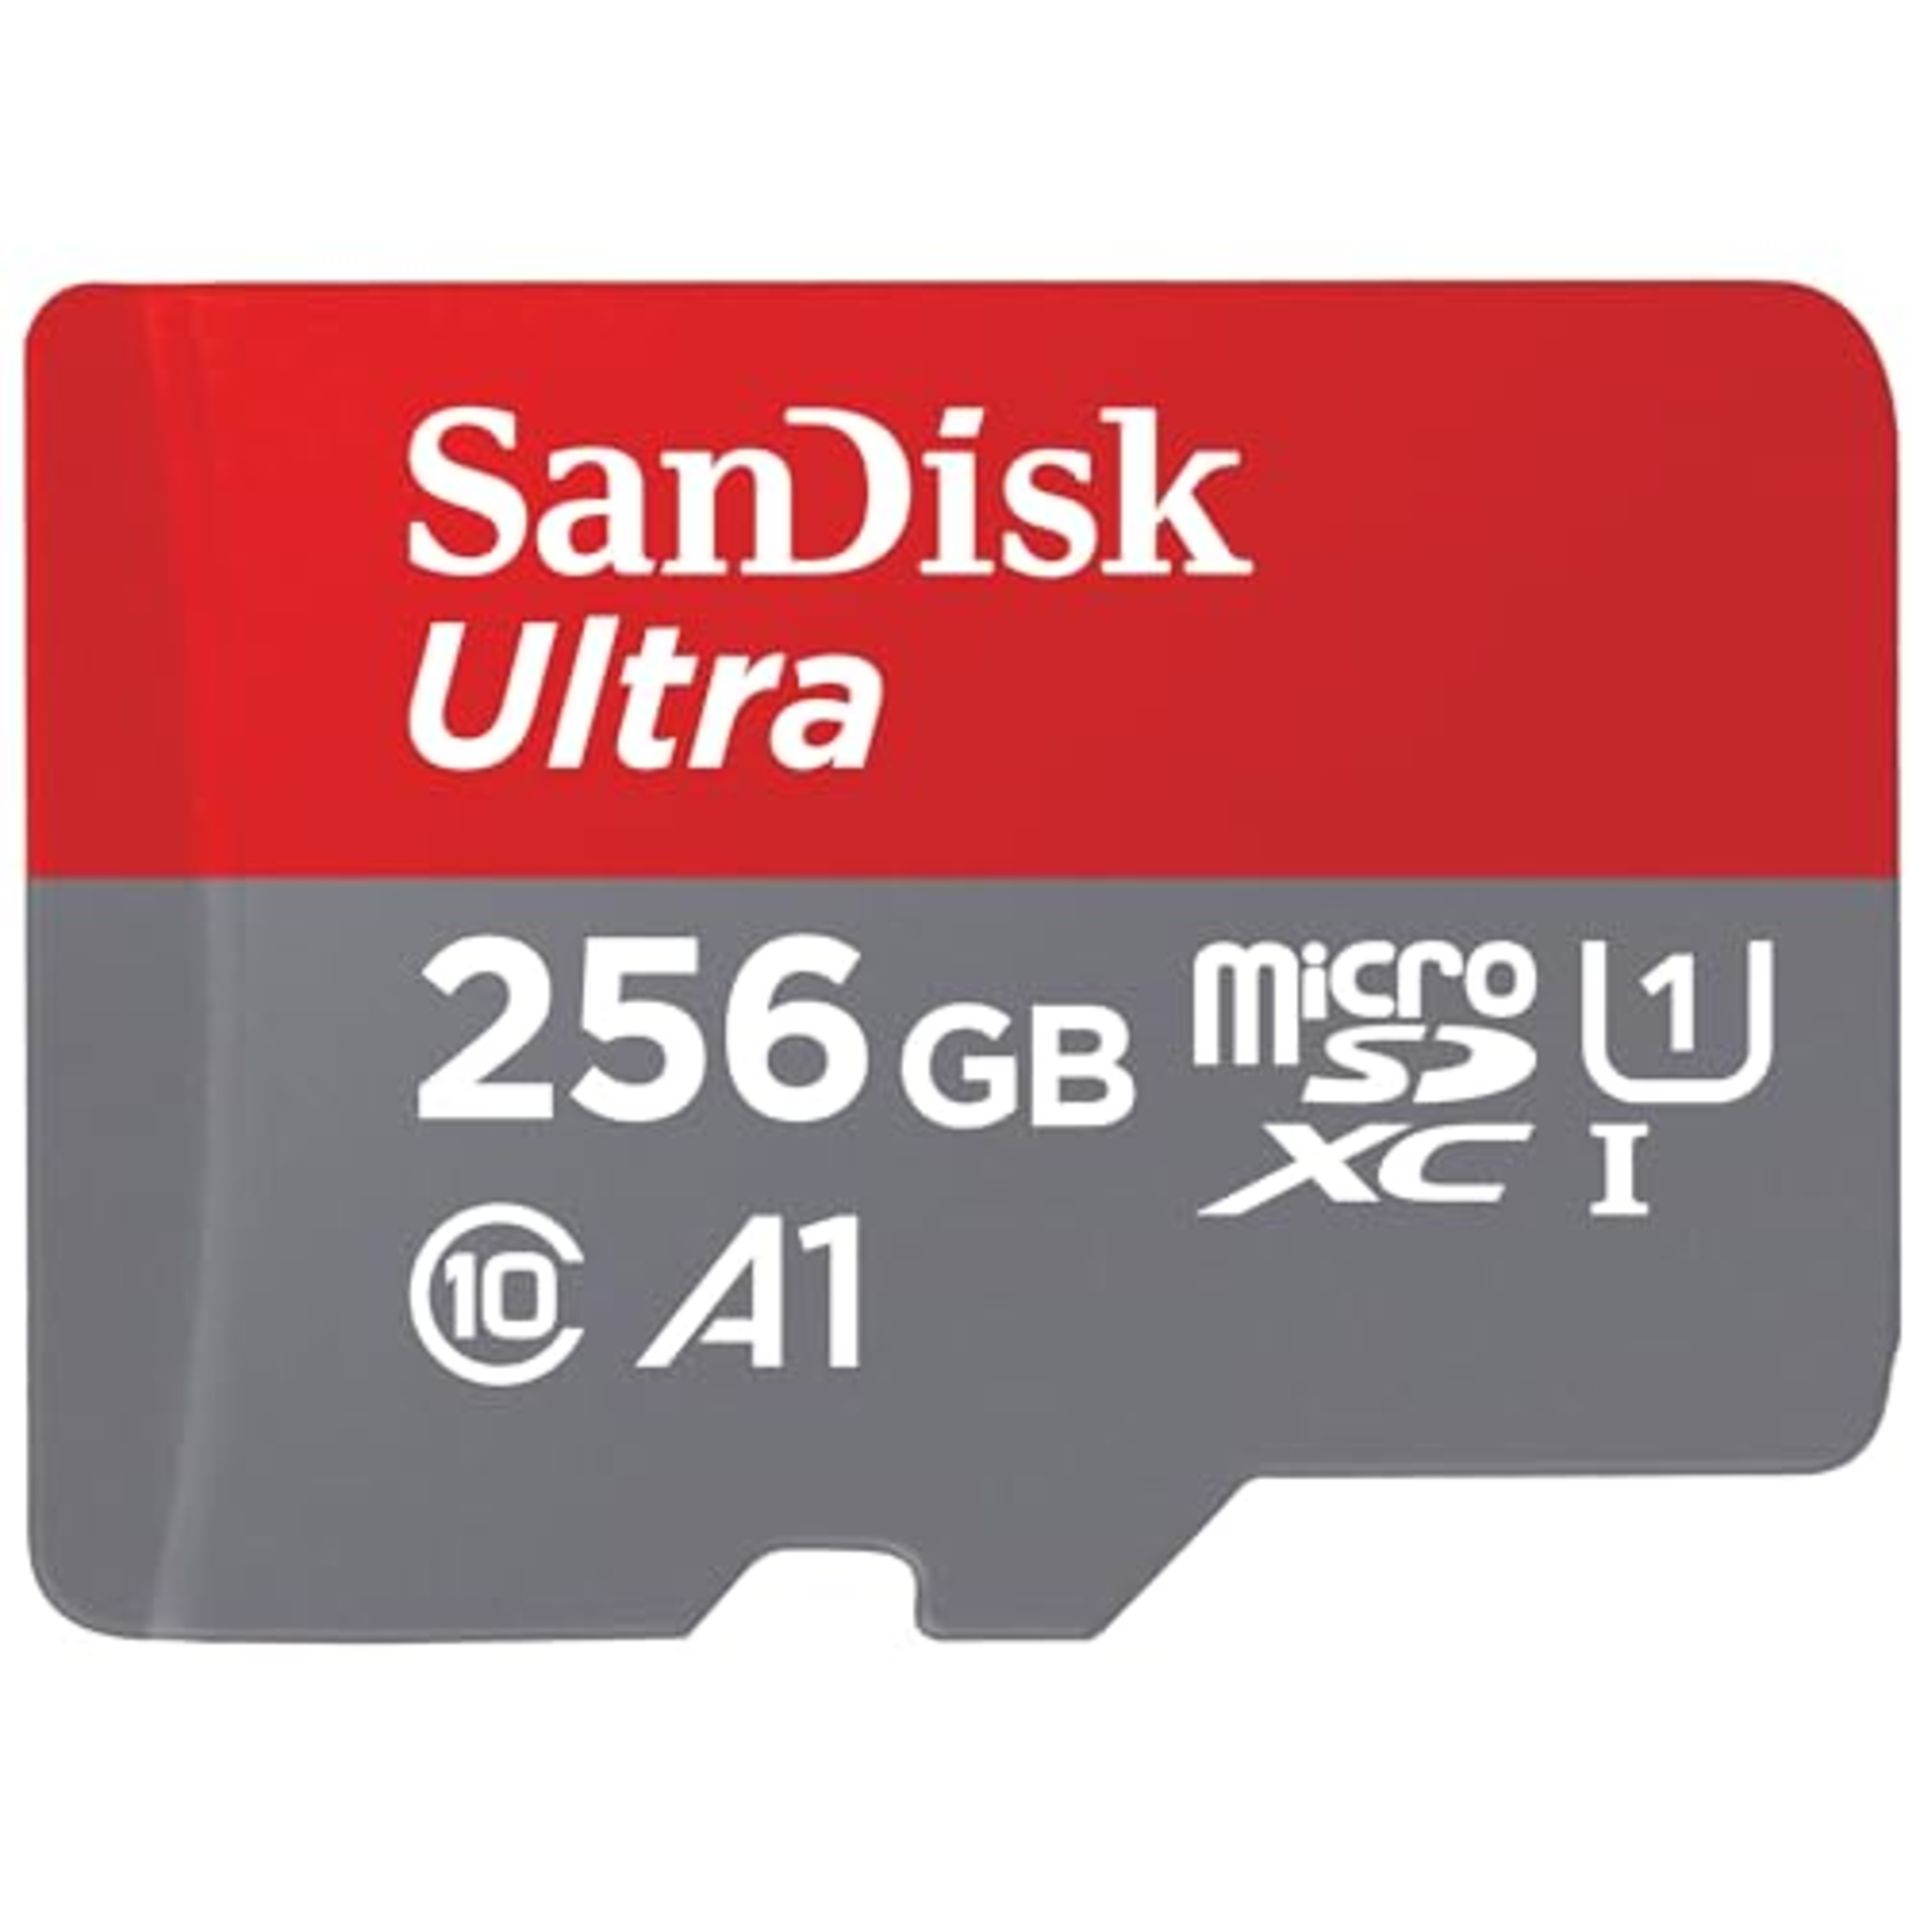 SanDisk Ultra Android microSDXC UHS-I Memory Card 256GB + Adapter (For Smartphones and - Image 3 of 4